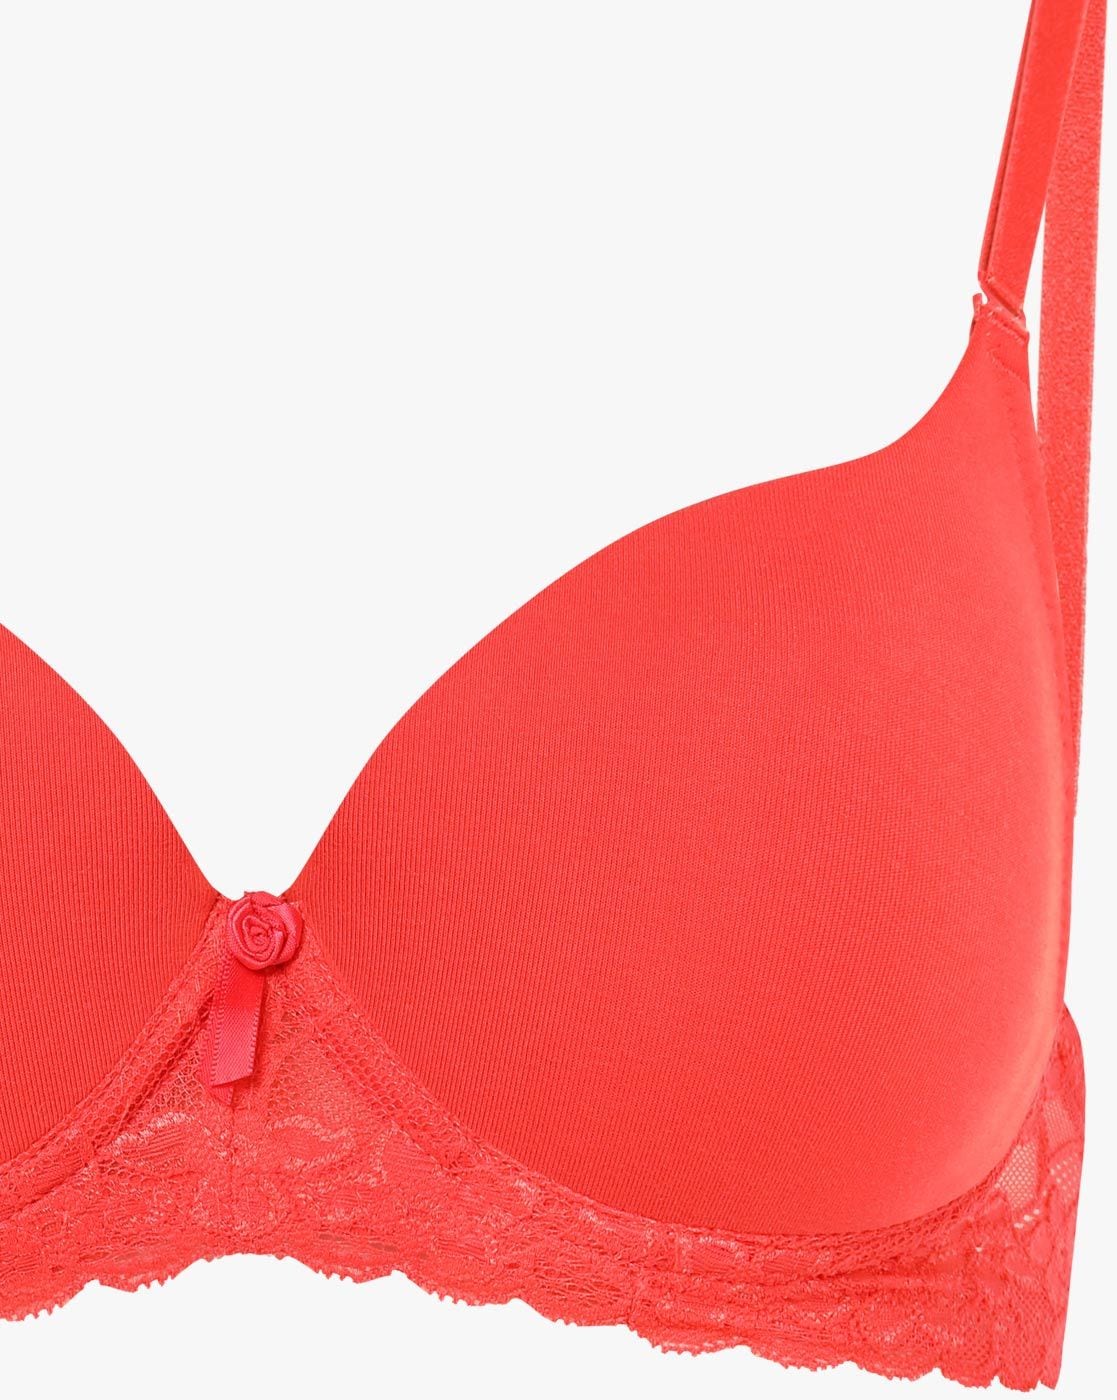 Buy Coral Bras for Women by Envie Online